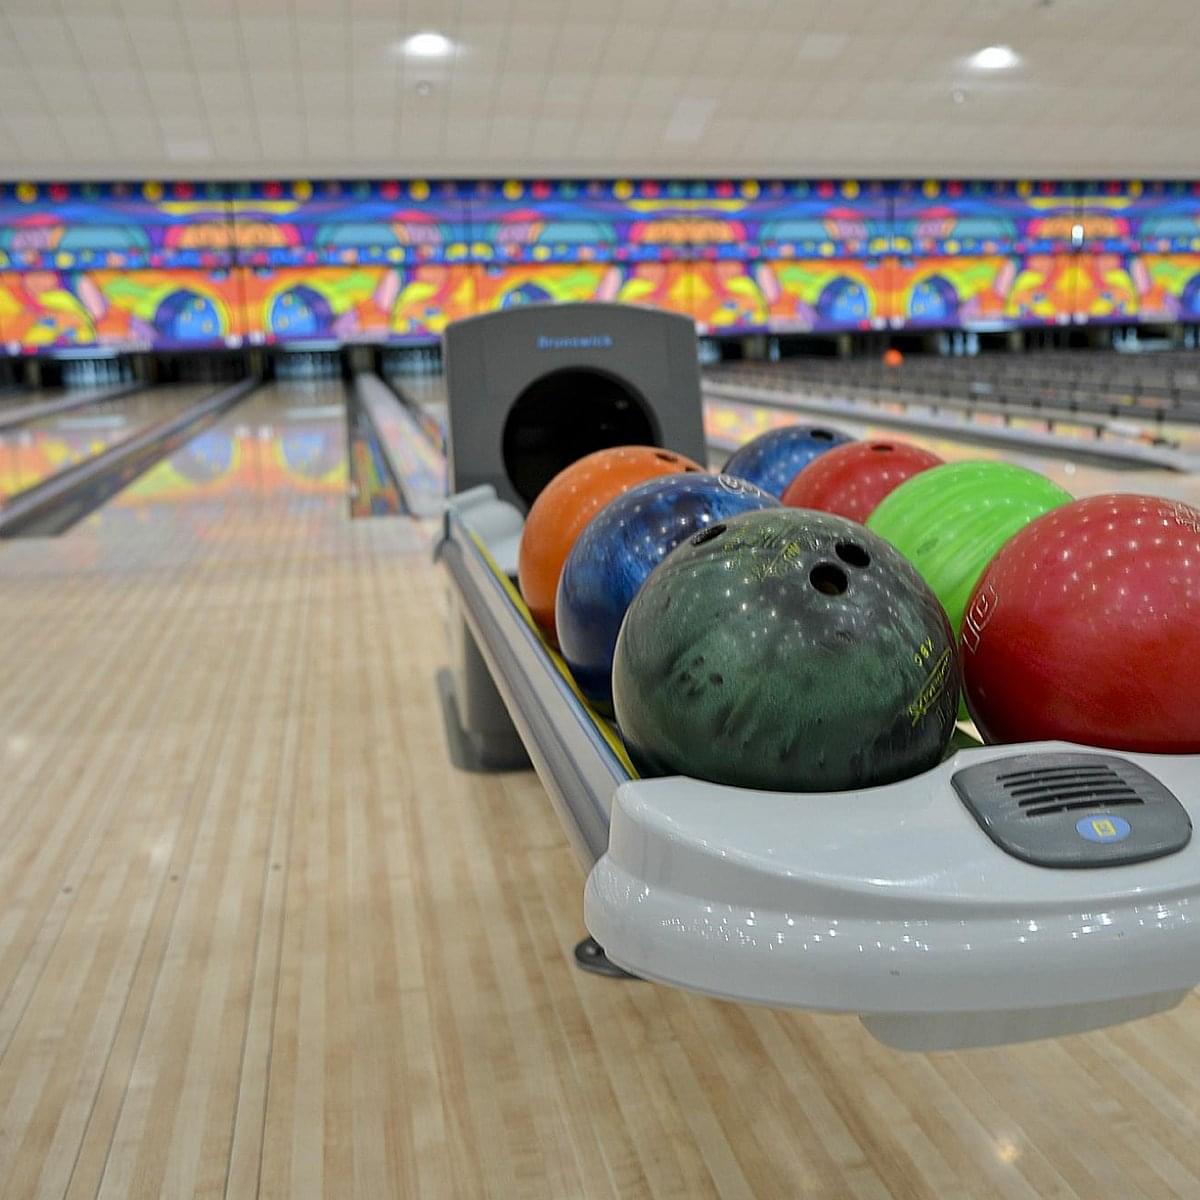 Choose from a variety of bowling balls for the perfect strike